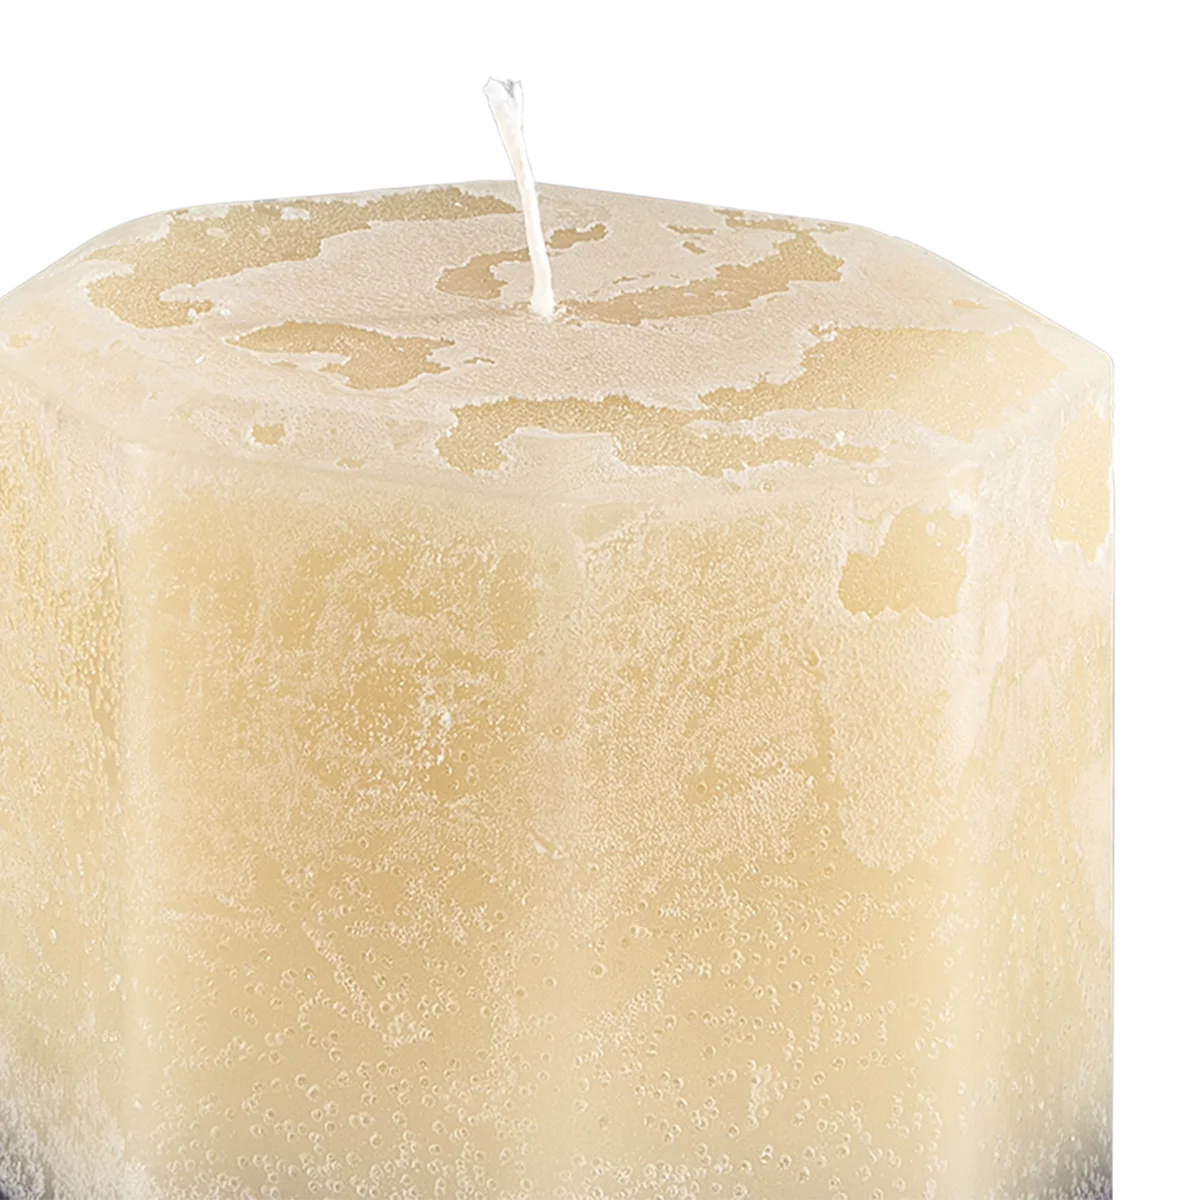 Bitter Orange and Ylang Octagon Candle